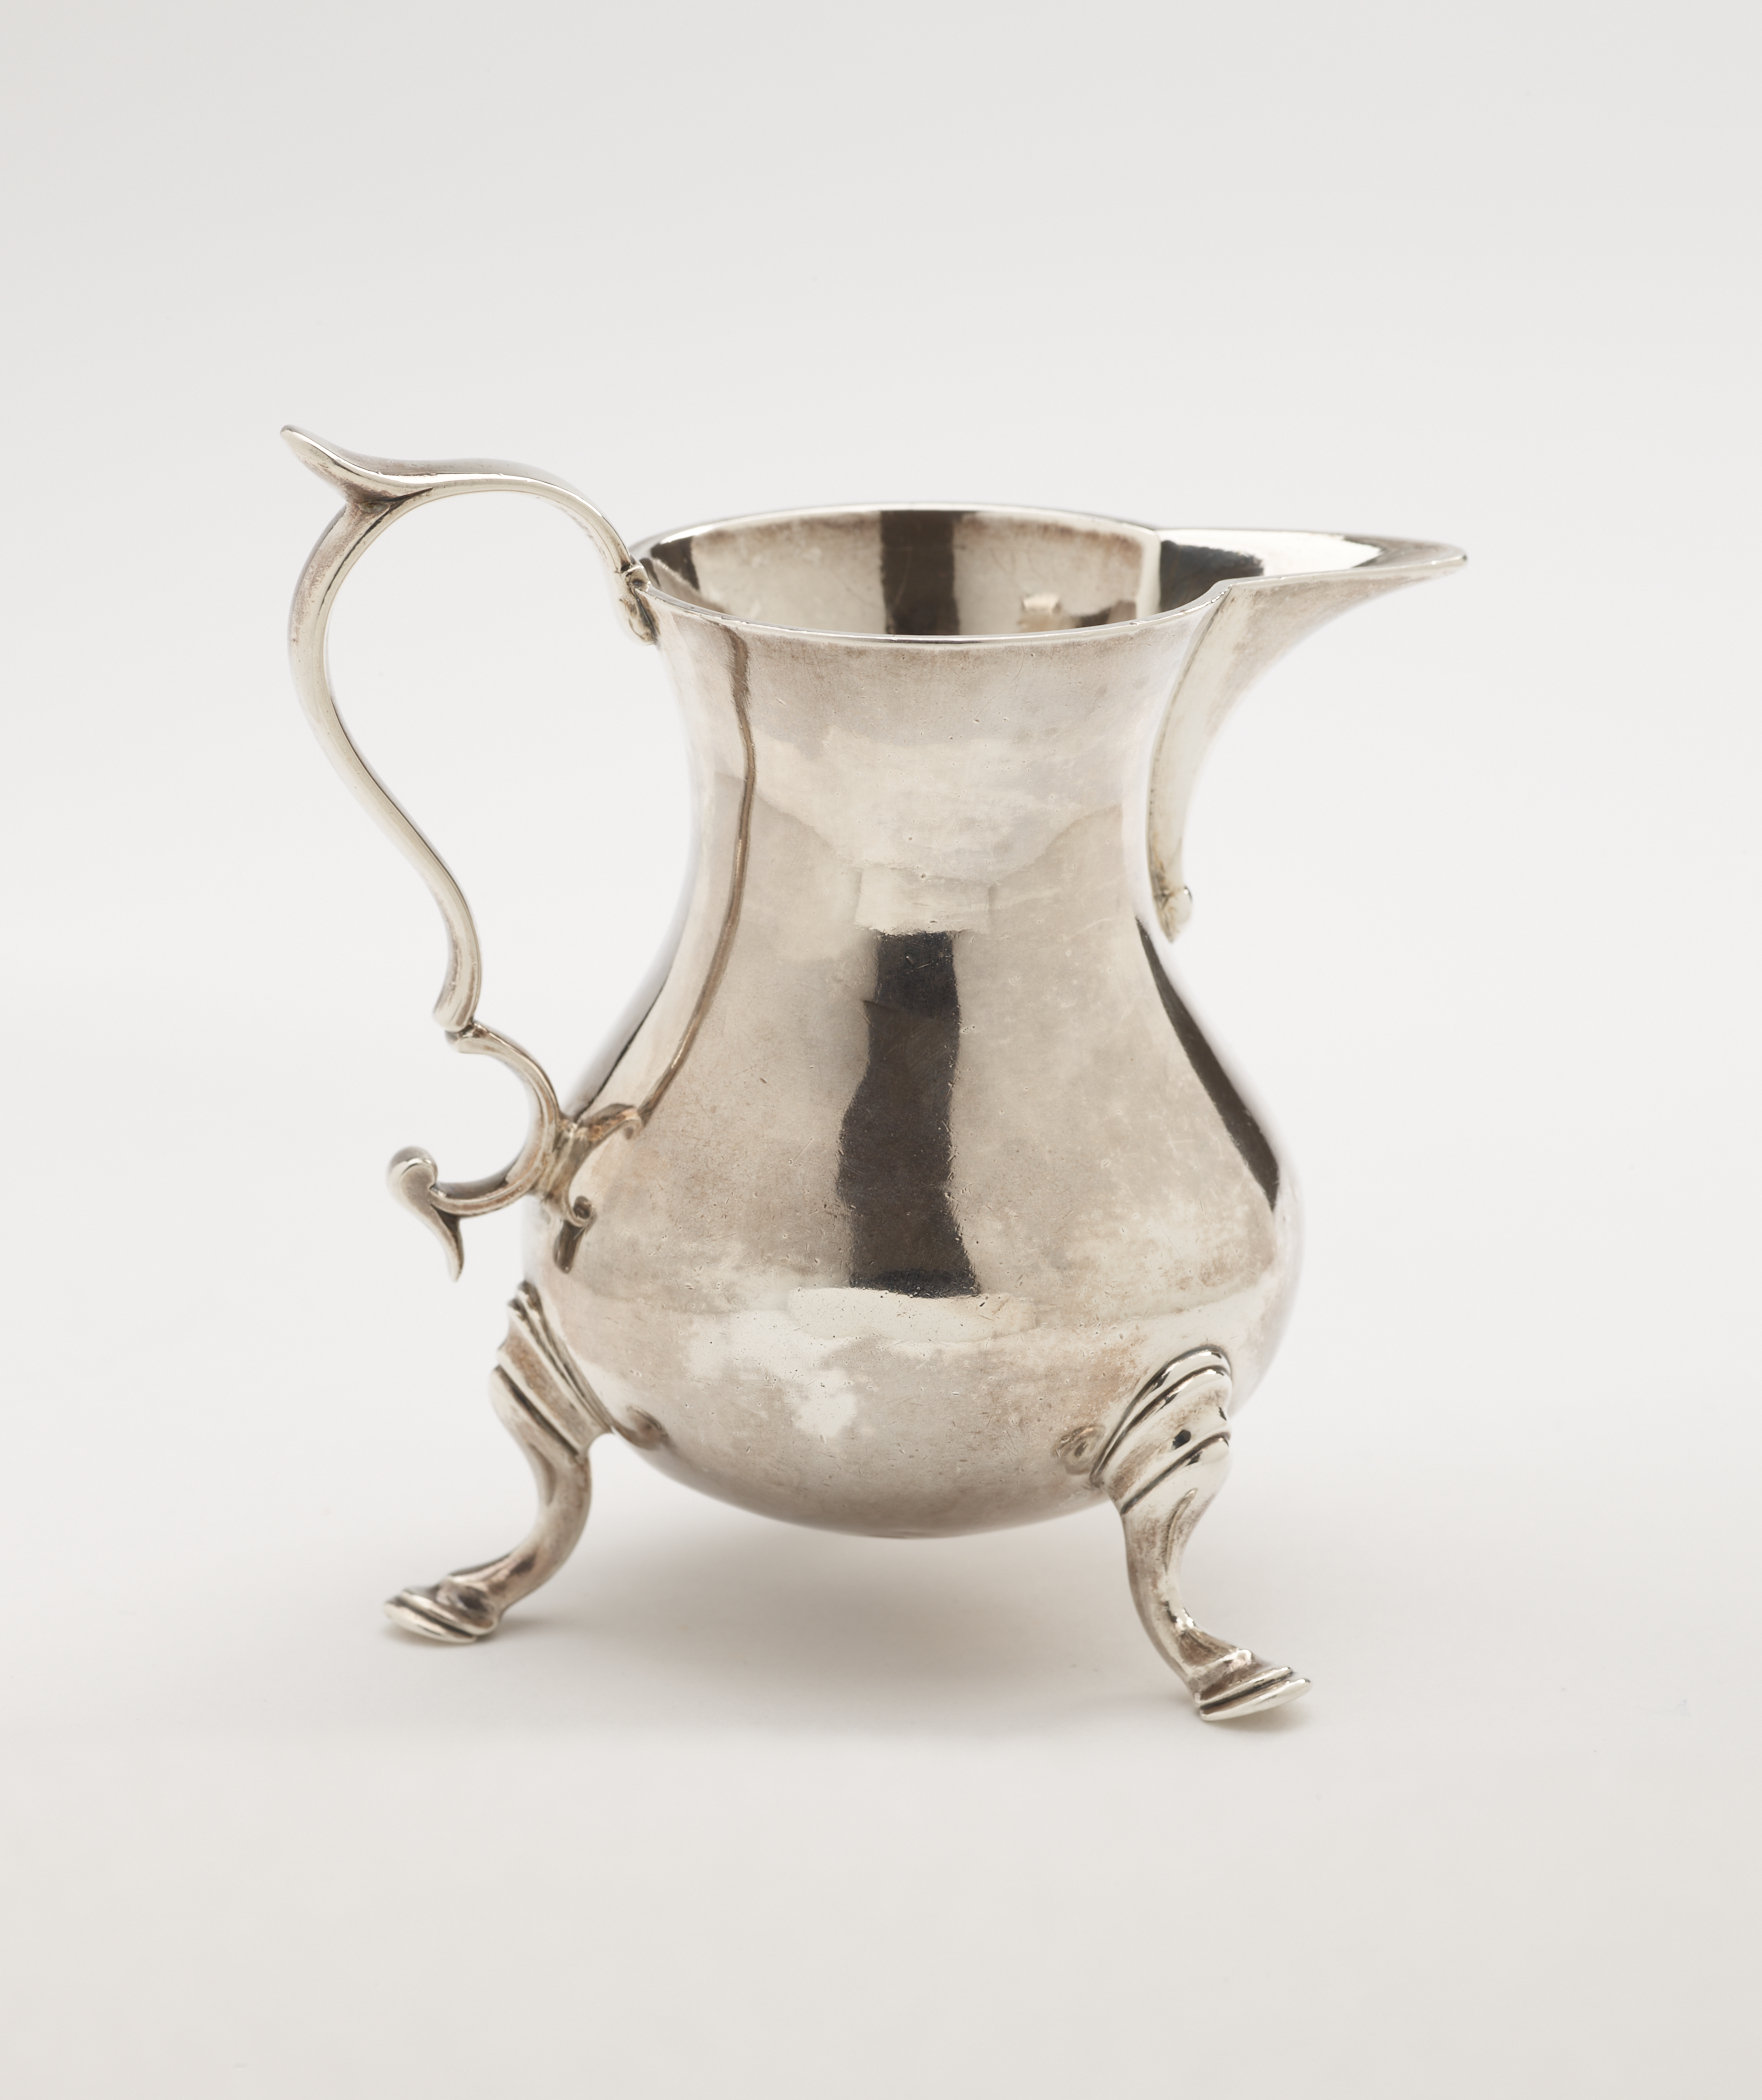 /A%20silver%20creamer%20with%20a%20sculptural%20handle%20and%20three%20protruding%20feet.%20